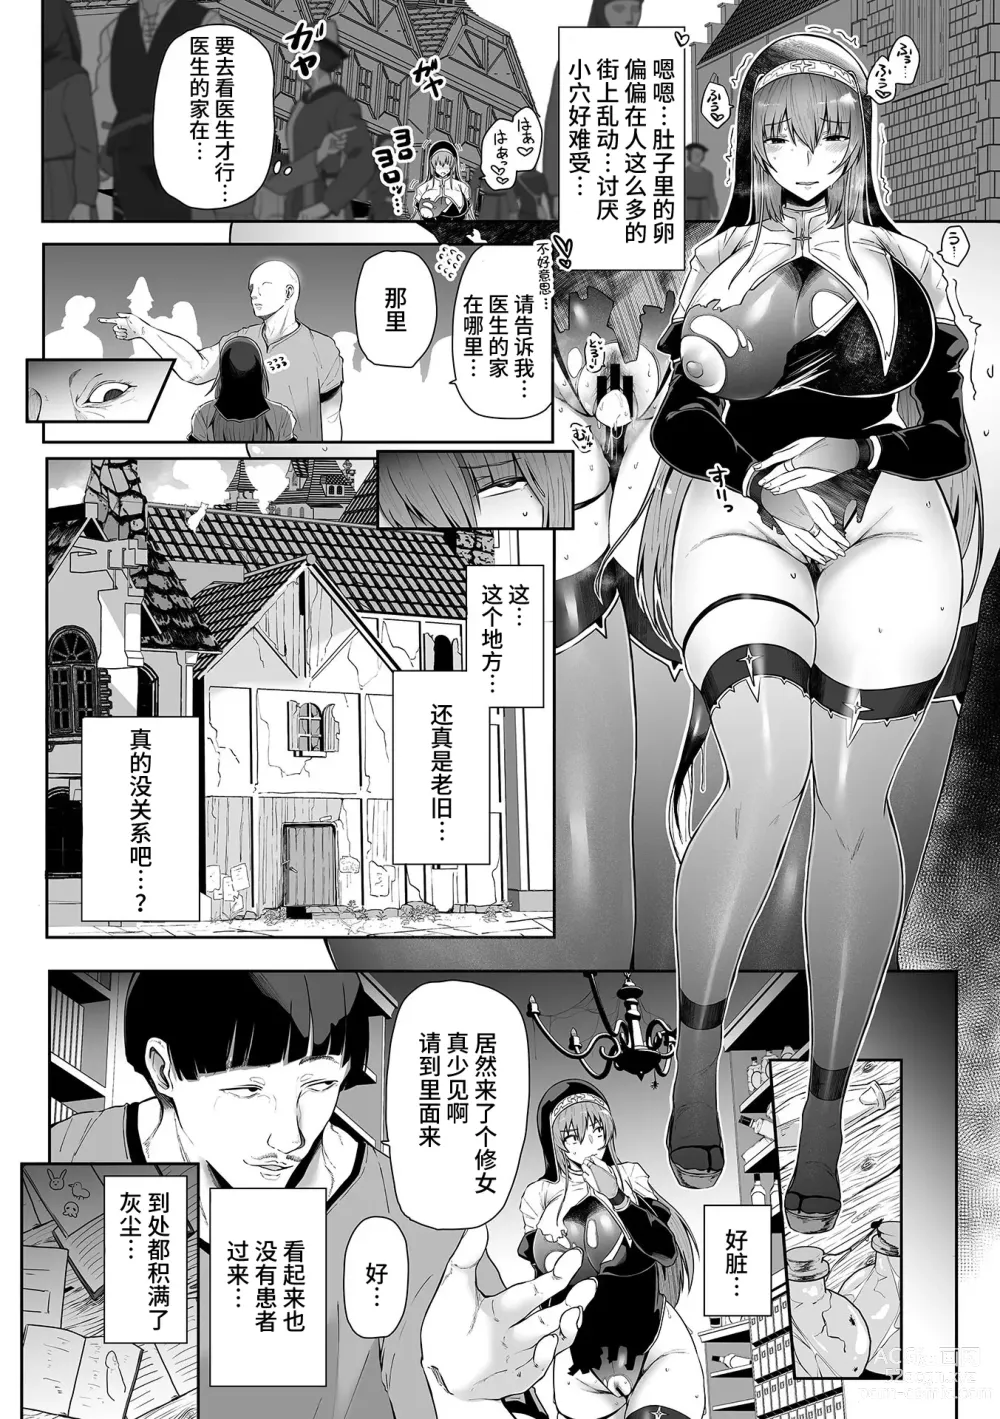 Page 7 of manga 淫蟲の聖女